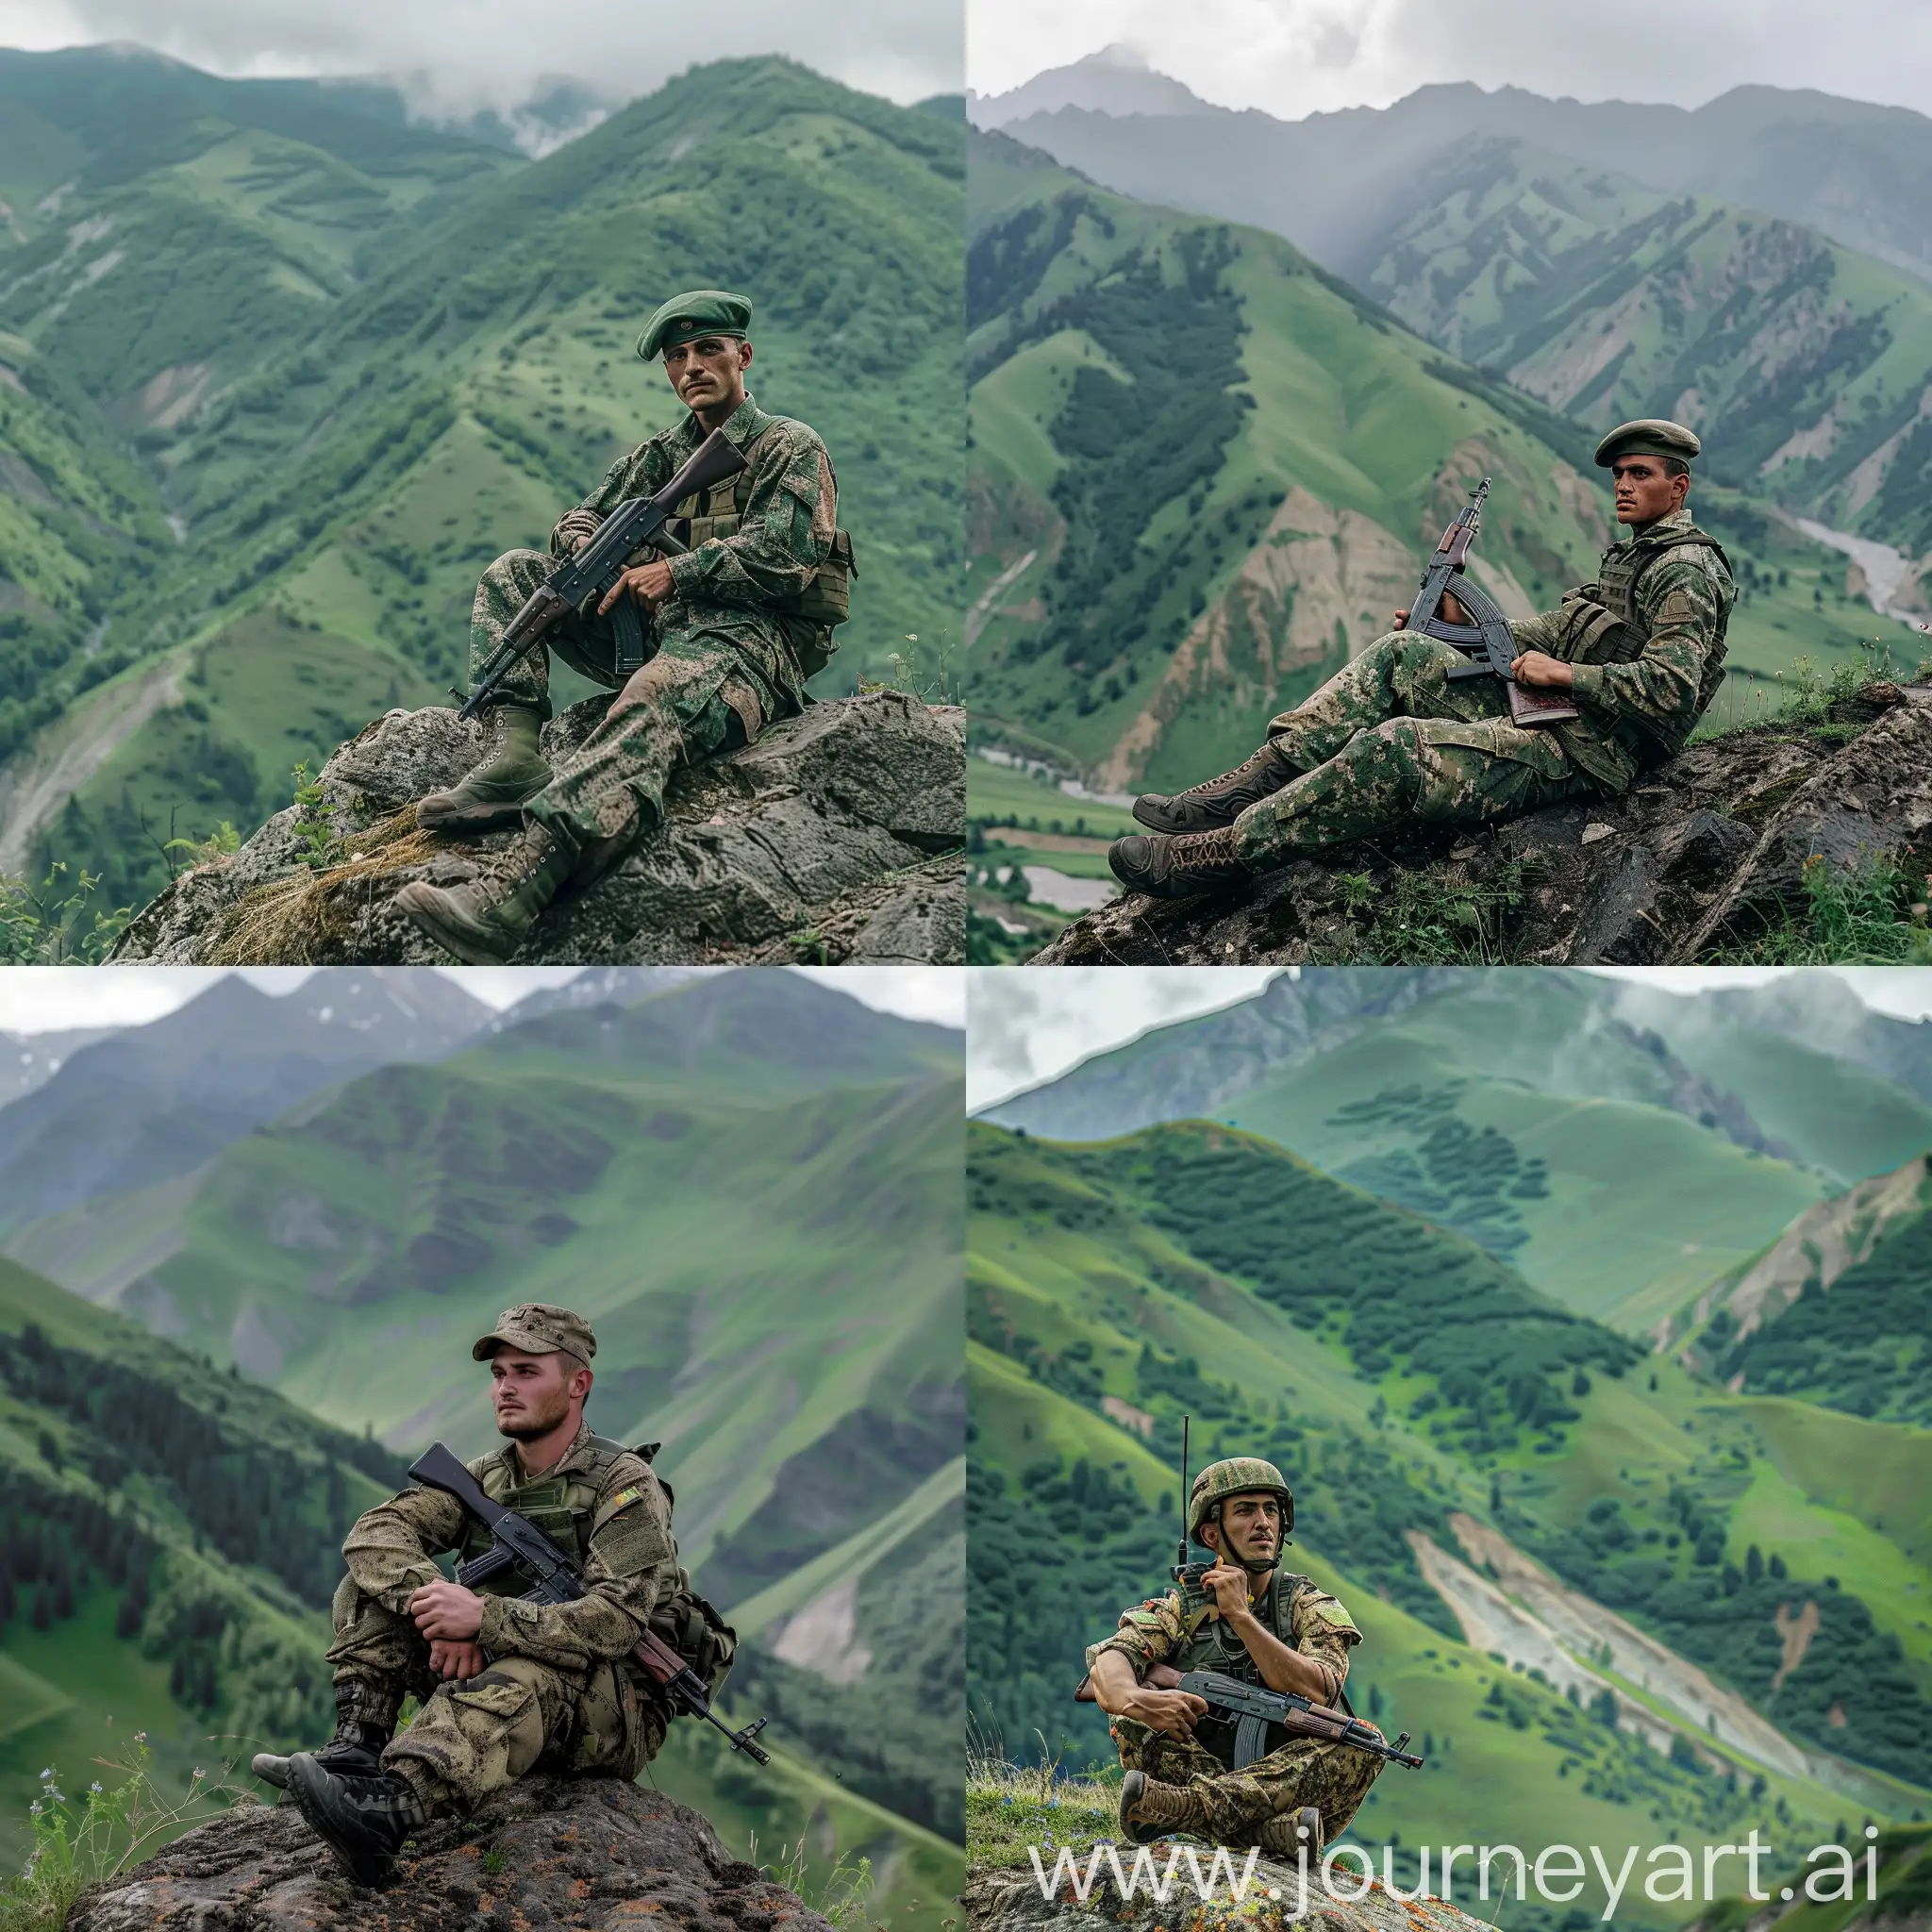 Soldier-Resting-Against-Green-Mountains-with-AK45